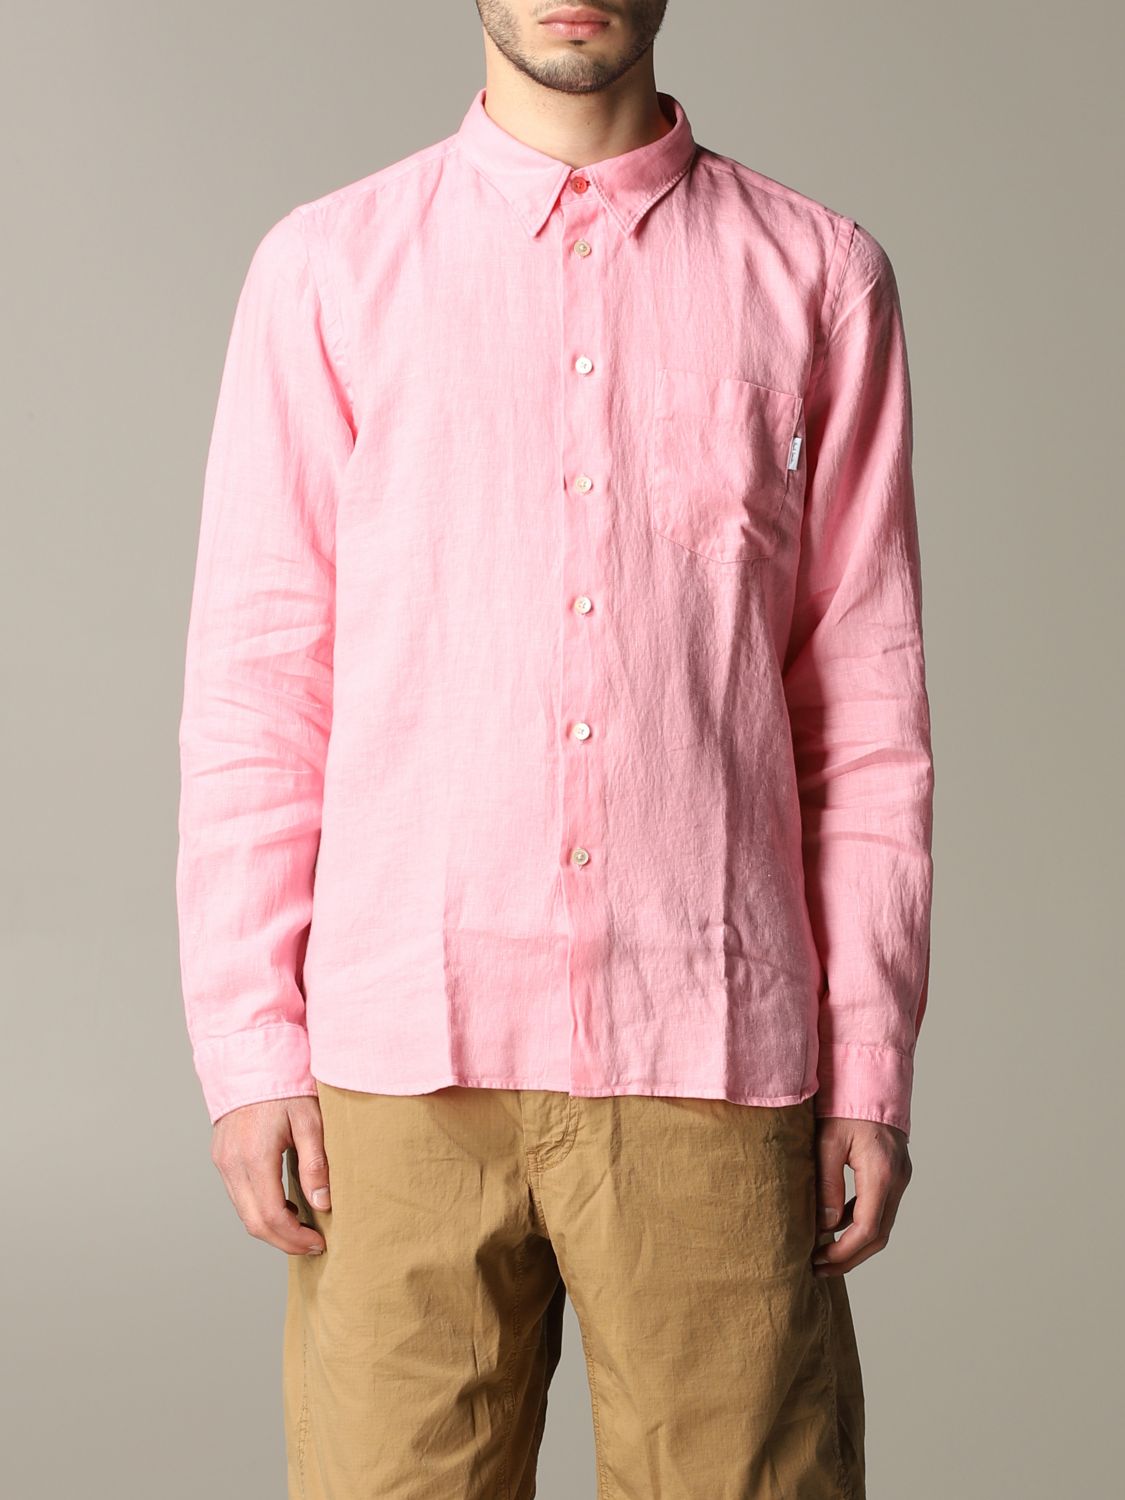 Paul Smith Outlet: shirt for man - Pink | Paul Smith shirt